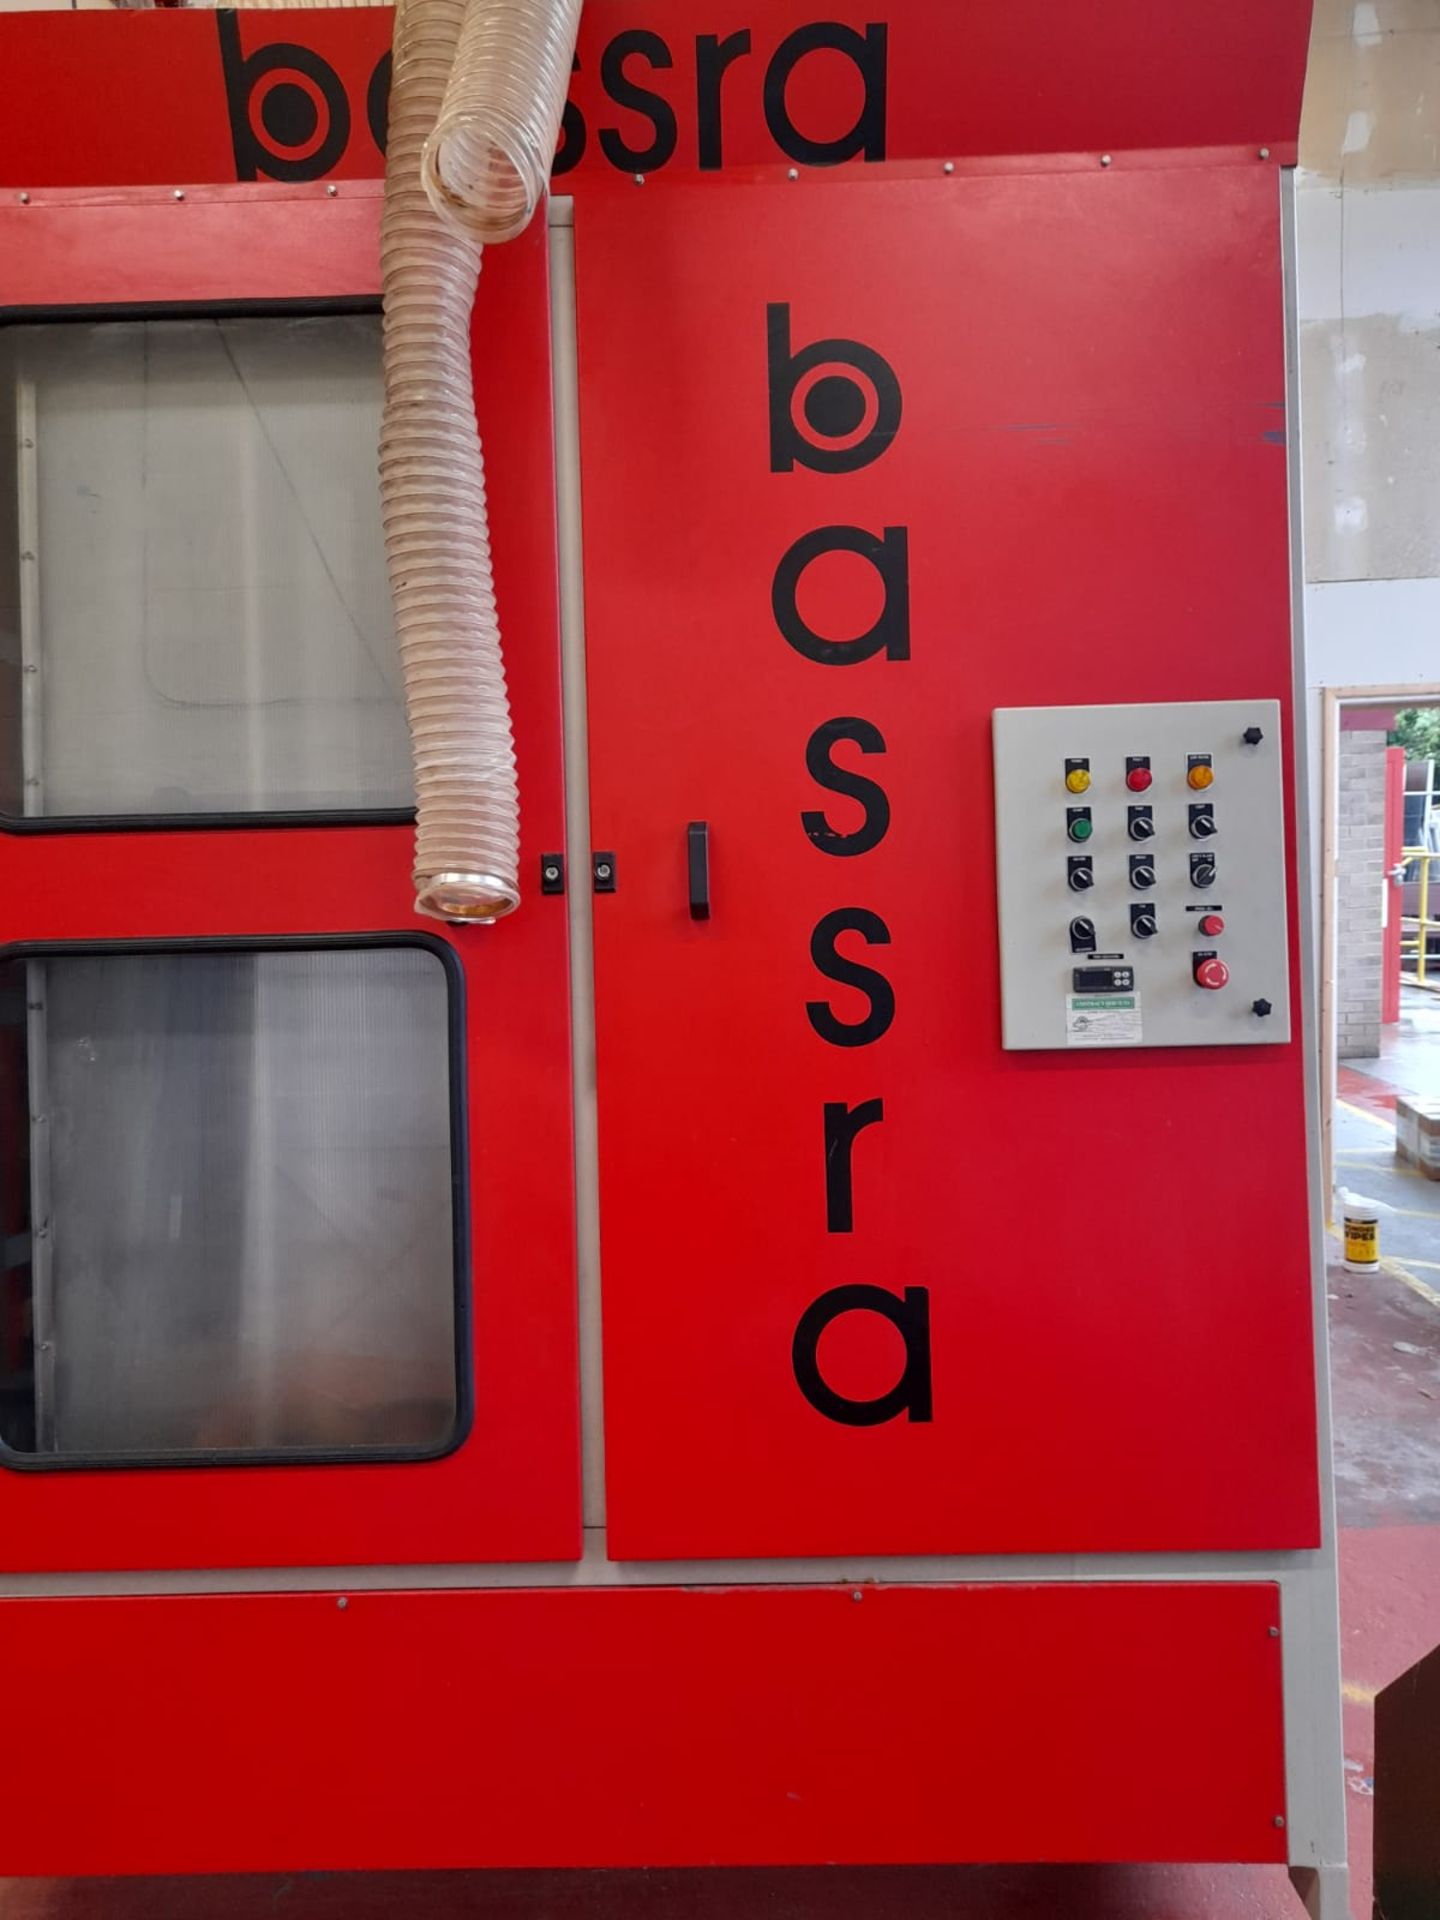 BASSRA BMT 1.7m 4 brush Glass Washer - Serial Number- BMT-1.7m-4BGW-BMT/11469 - Image 5 of 9